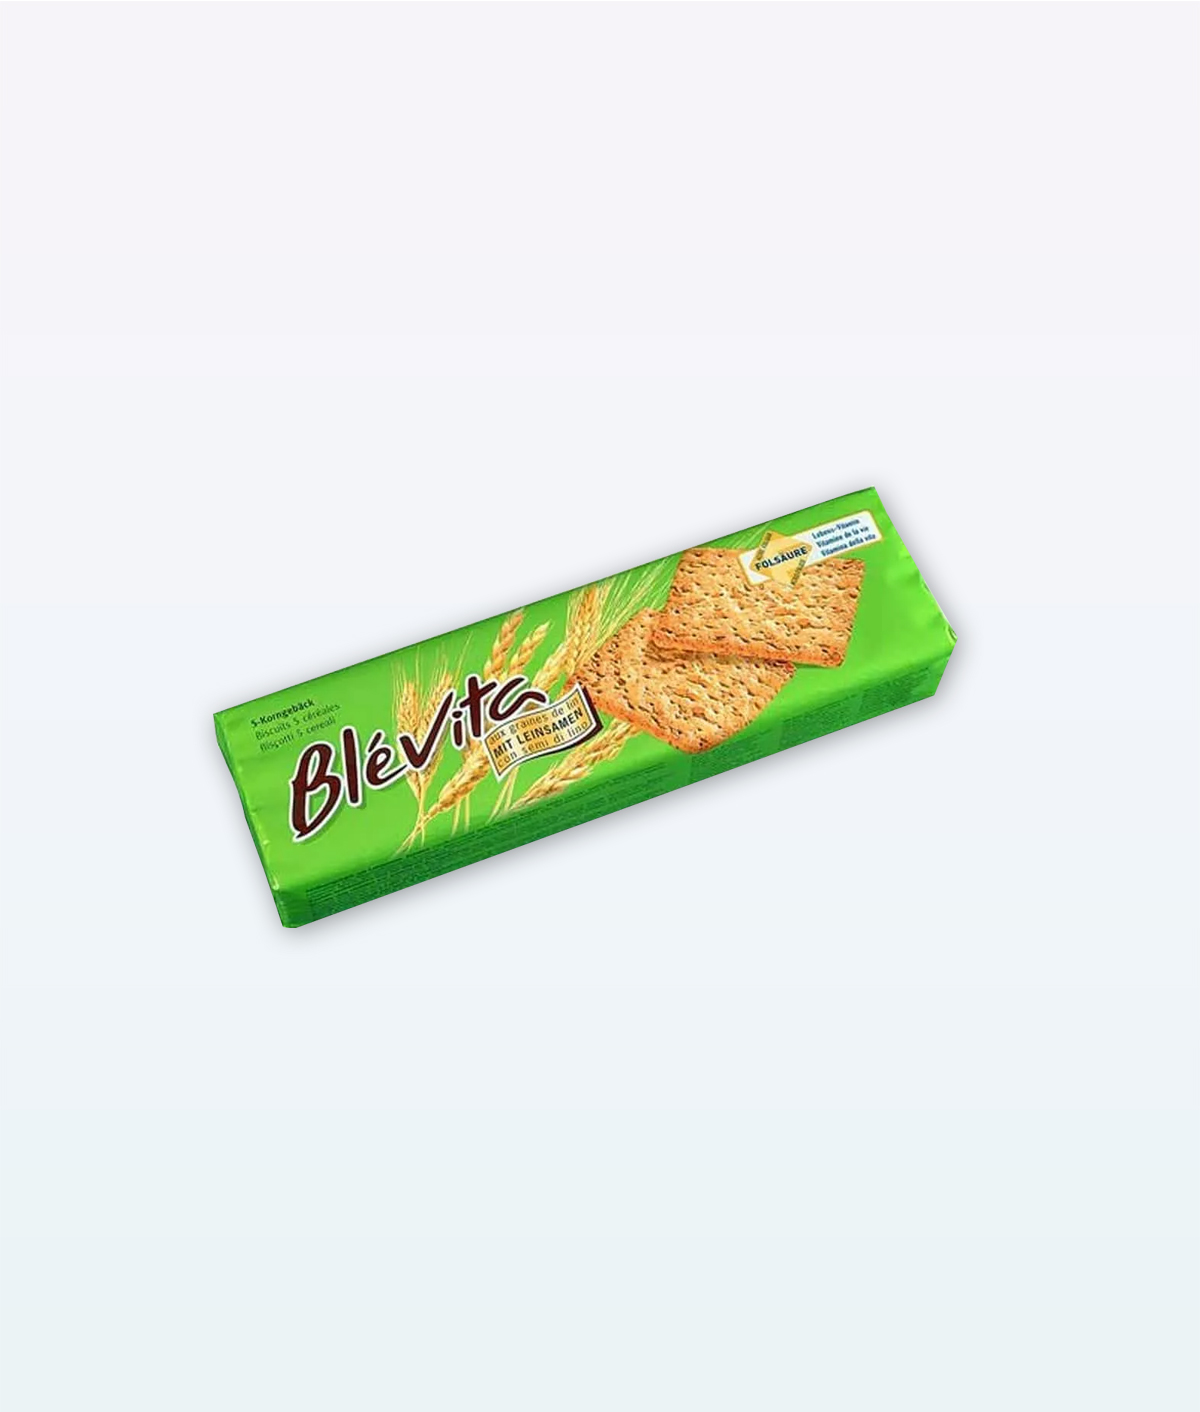 Blevita Biscuit Five Grains with Flax Seed 295g